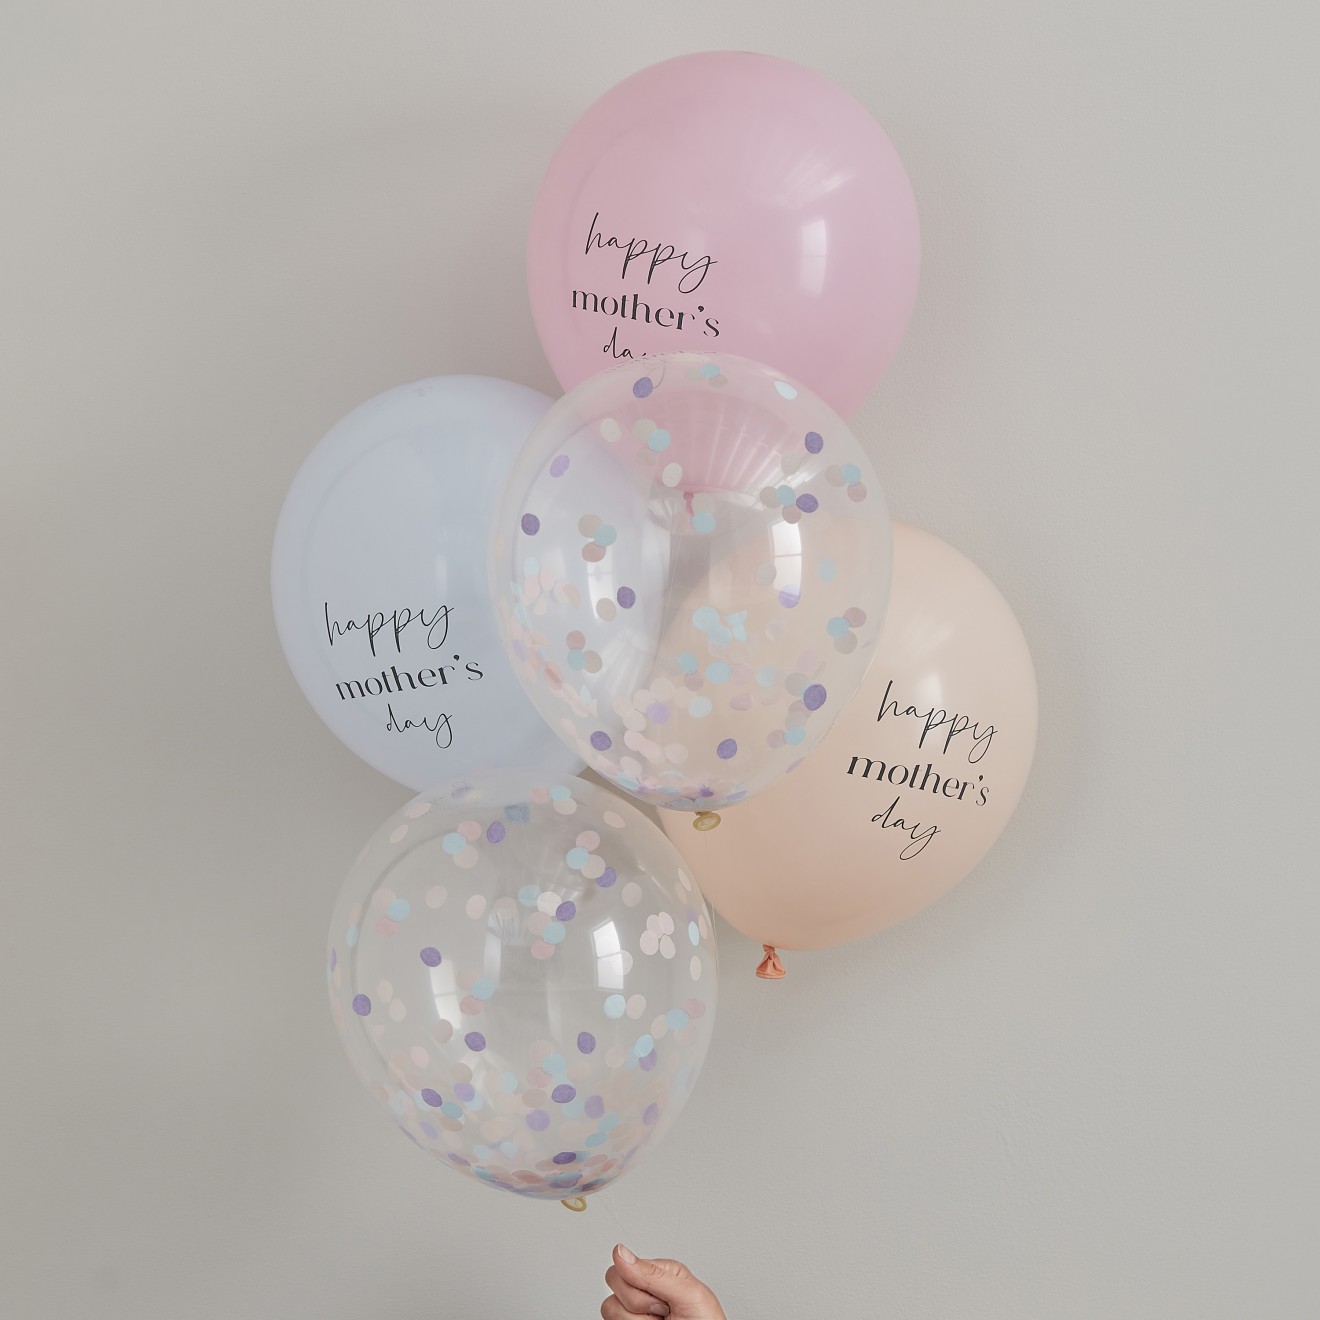 Balloons - 5 Pack Happy Mother's Day - Printed and Confetti Balloons